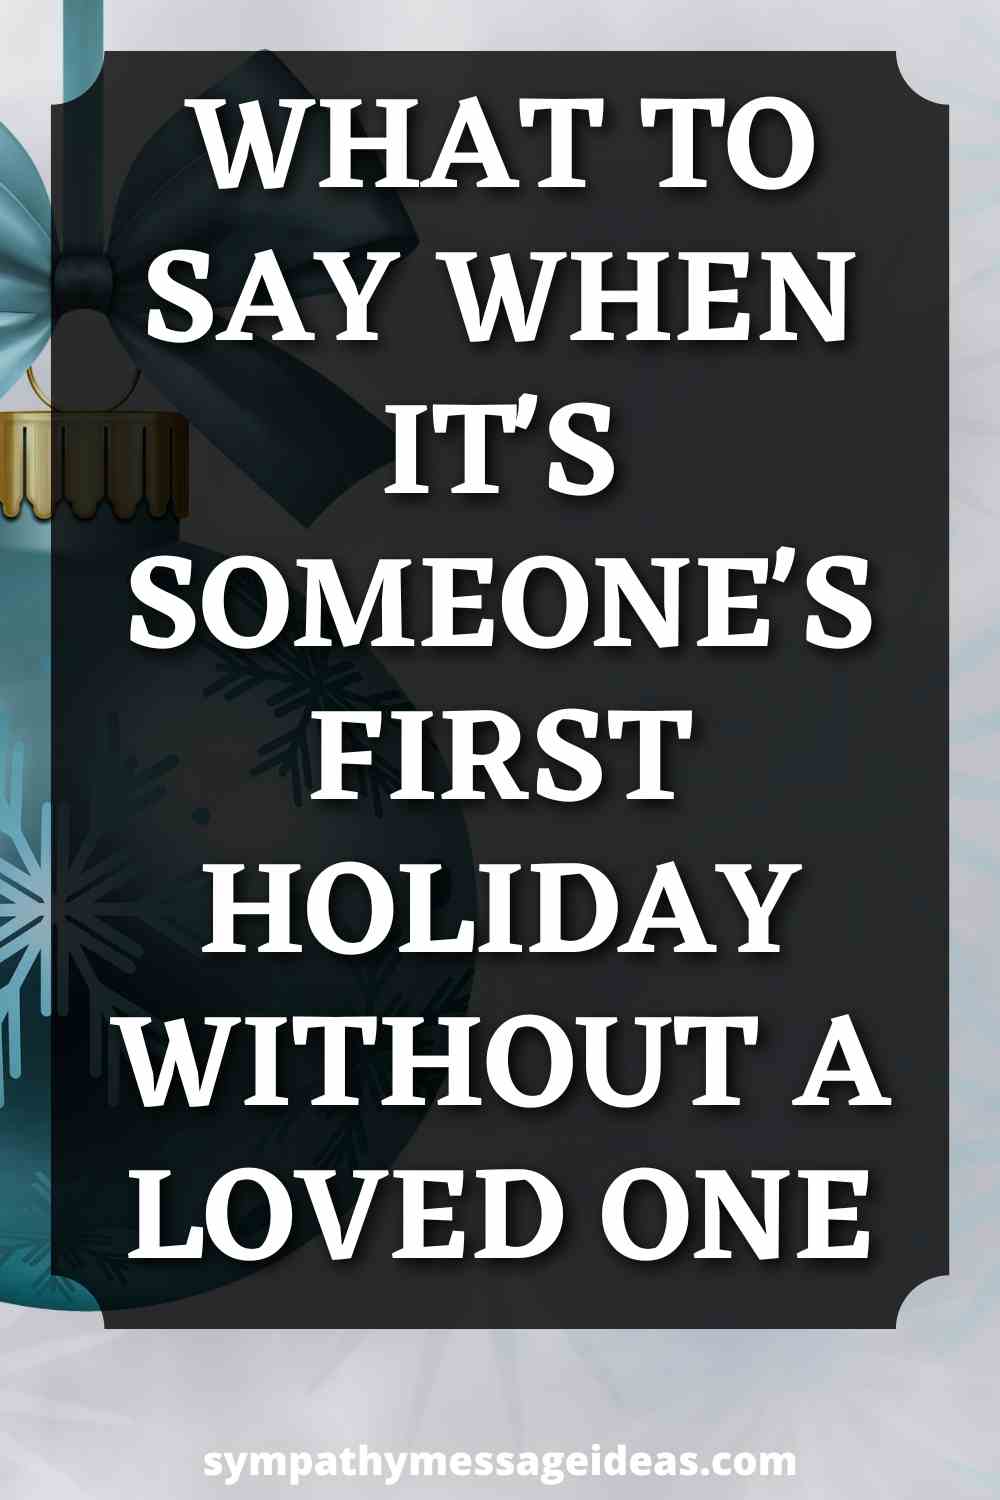 what to say when it's someone's first holiday without a loved one